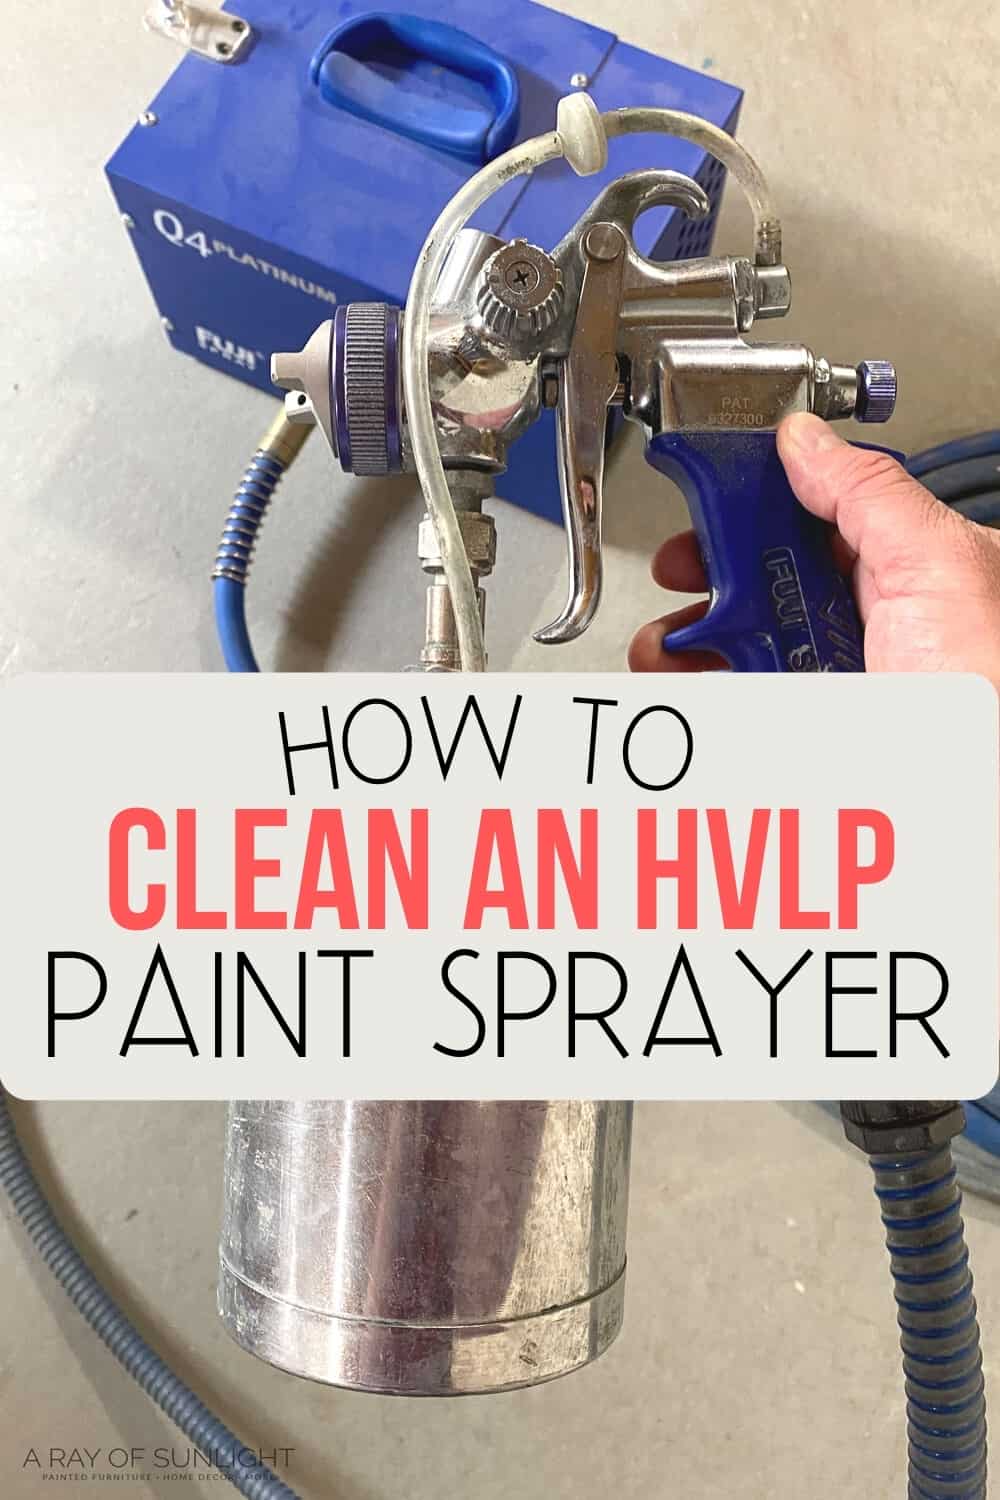 How to Clean the Fuji Q4 Paint Sprayer